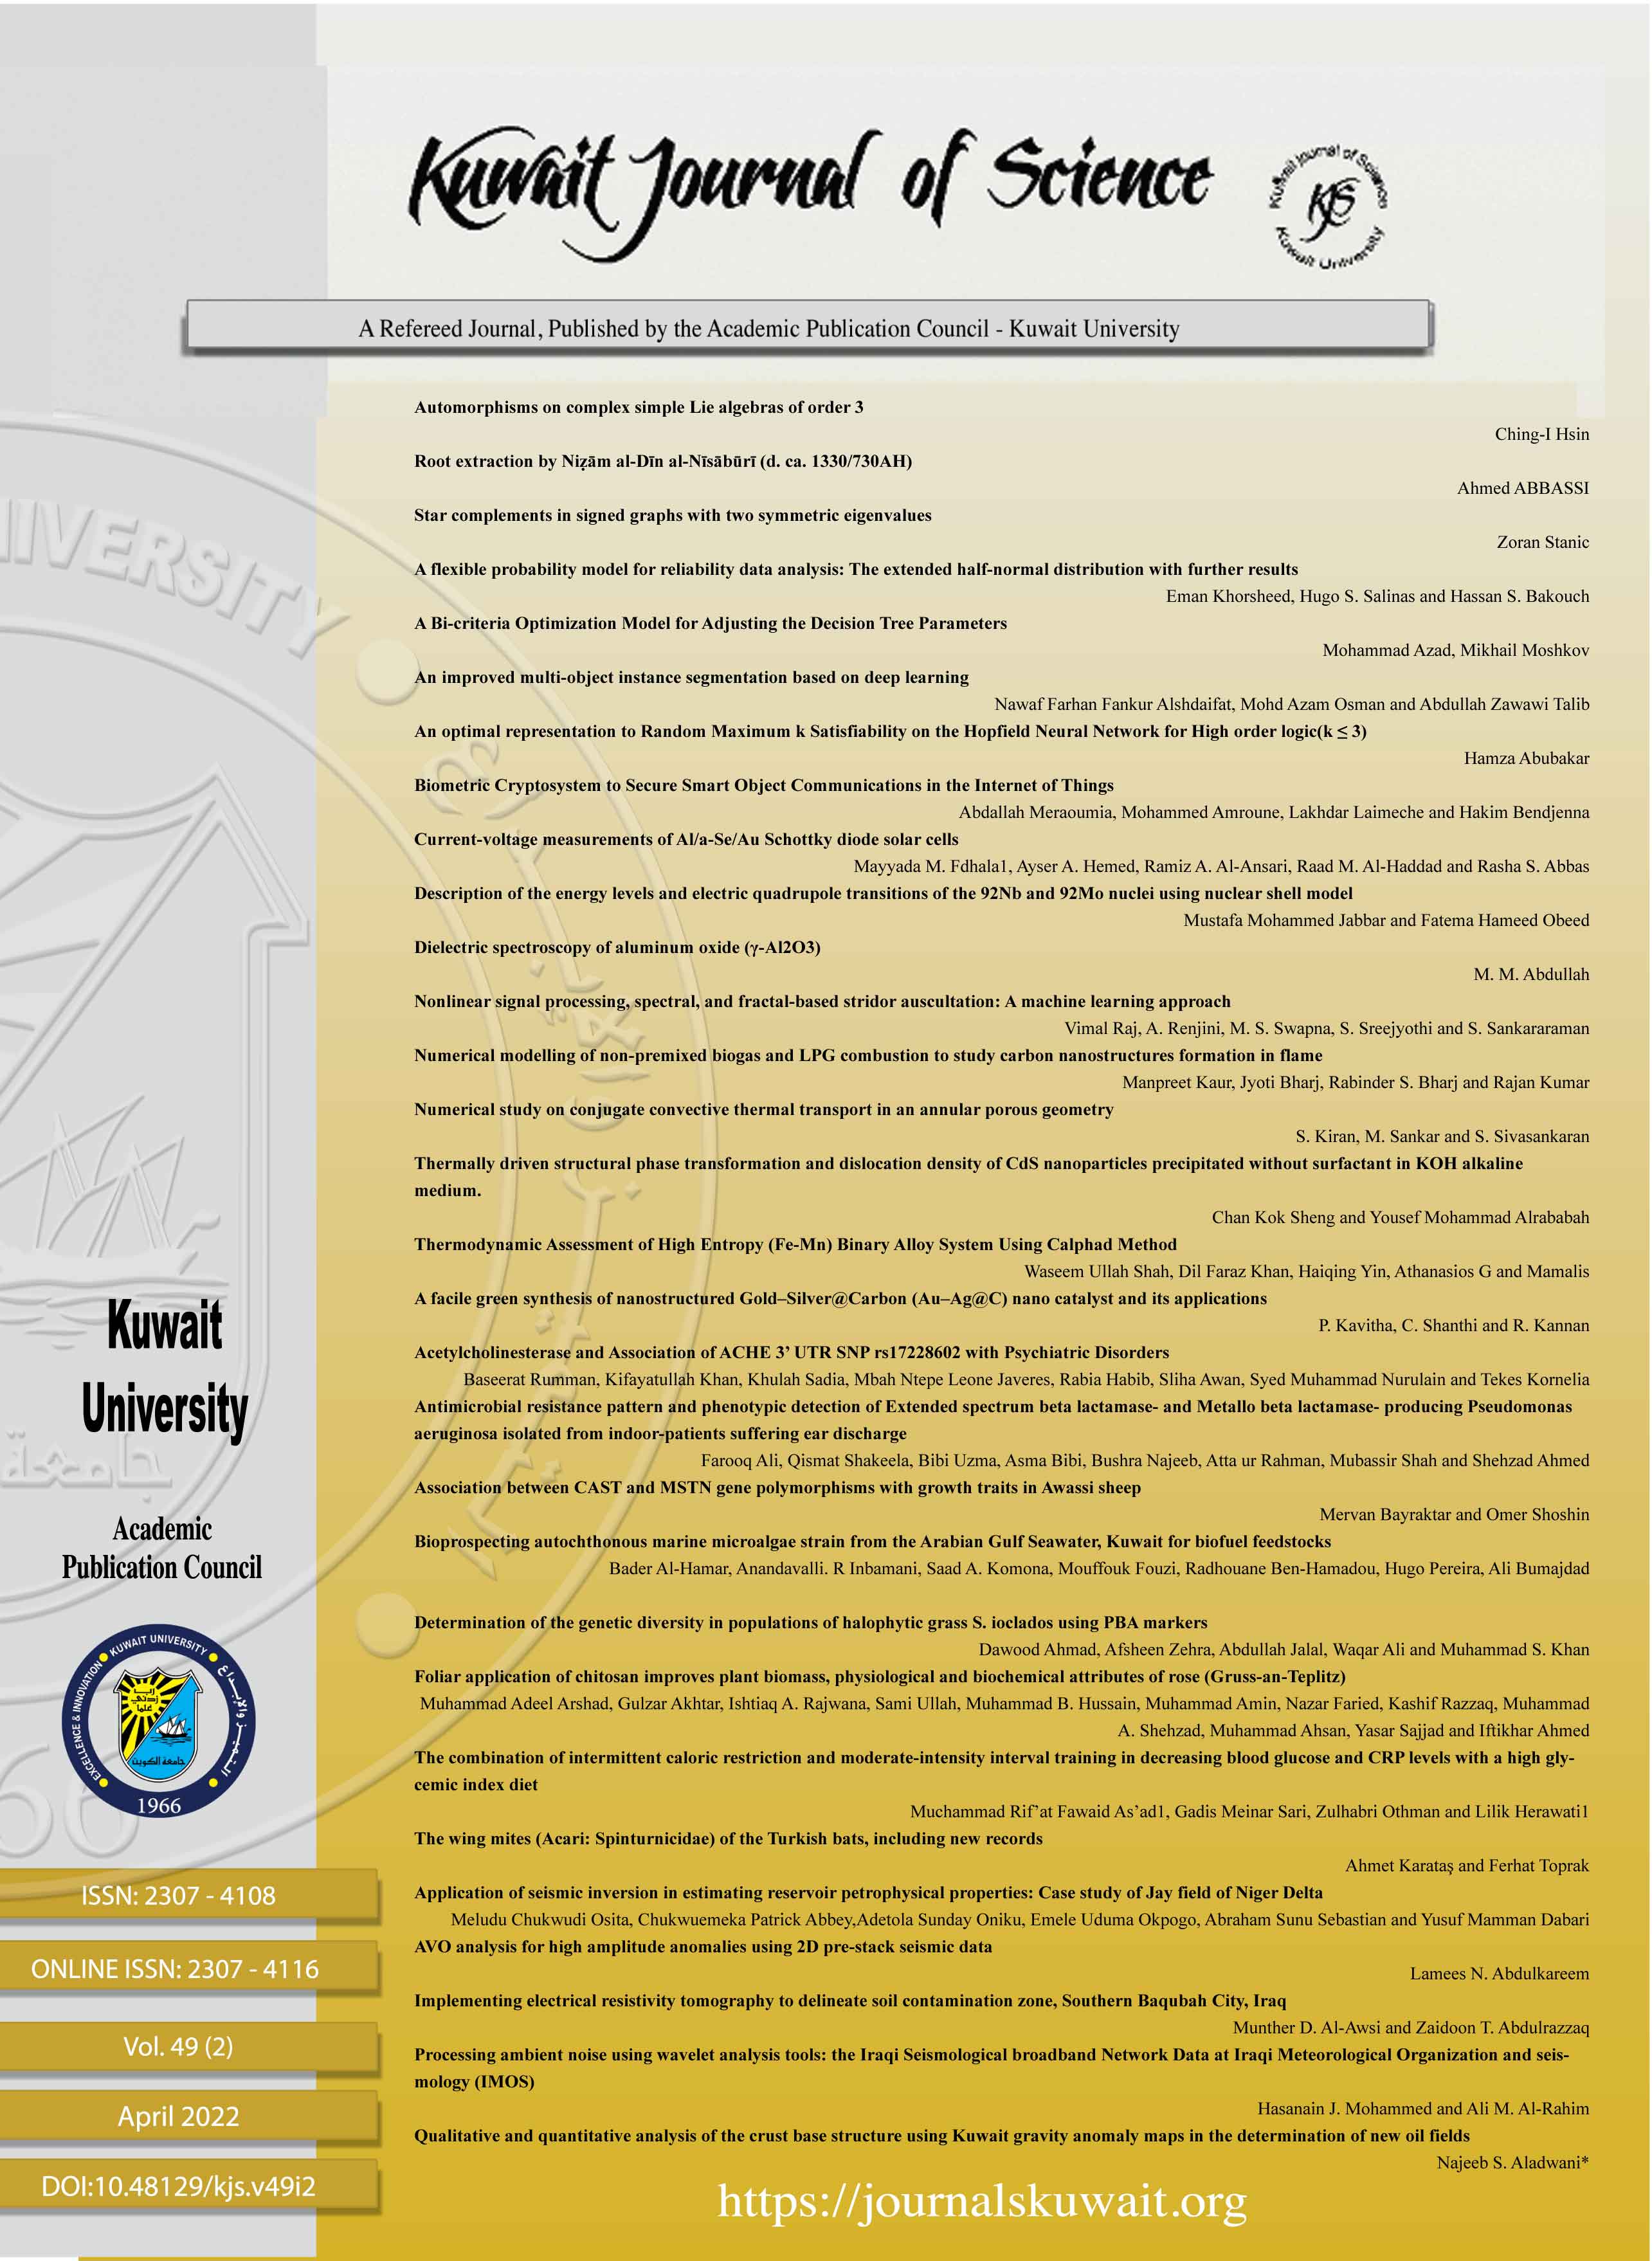 					View Vol. 49 No. 2 (2022):  Kuwait Journal of Science
				